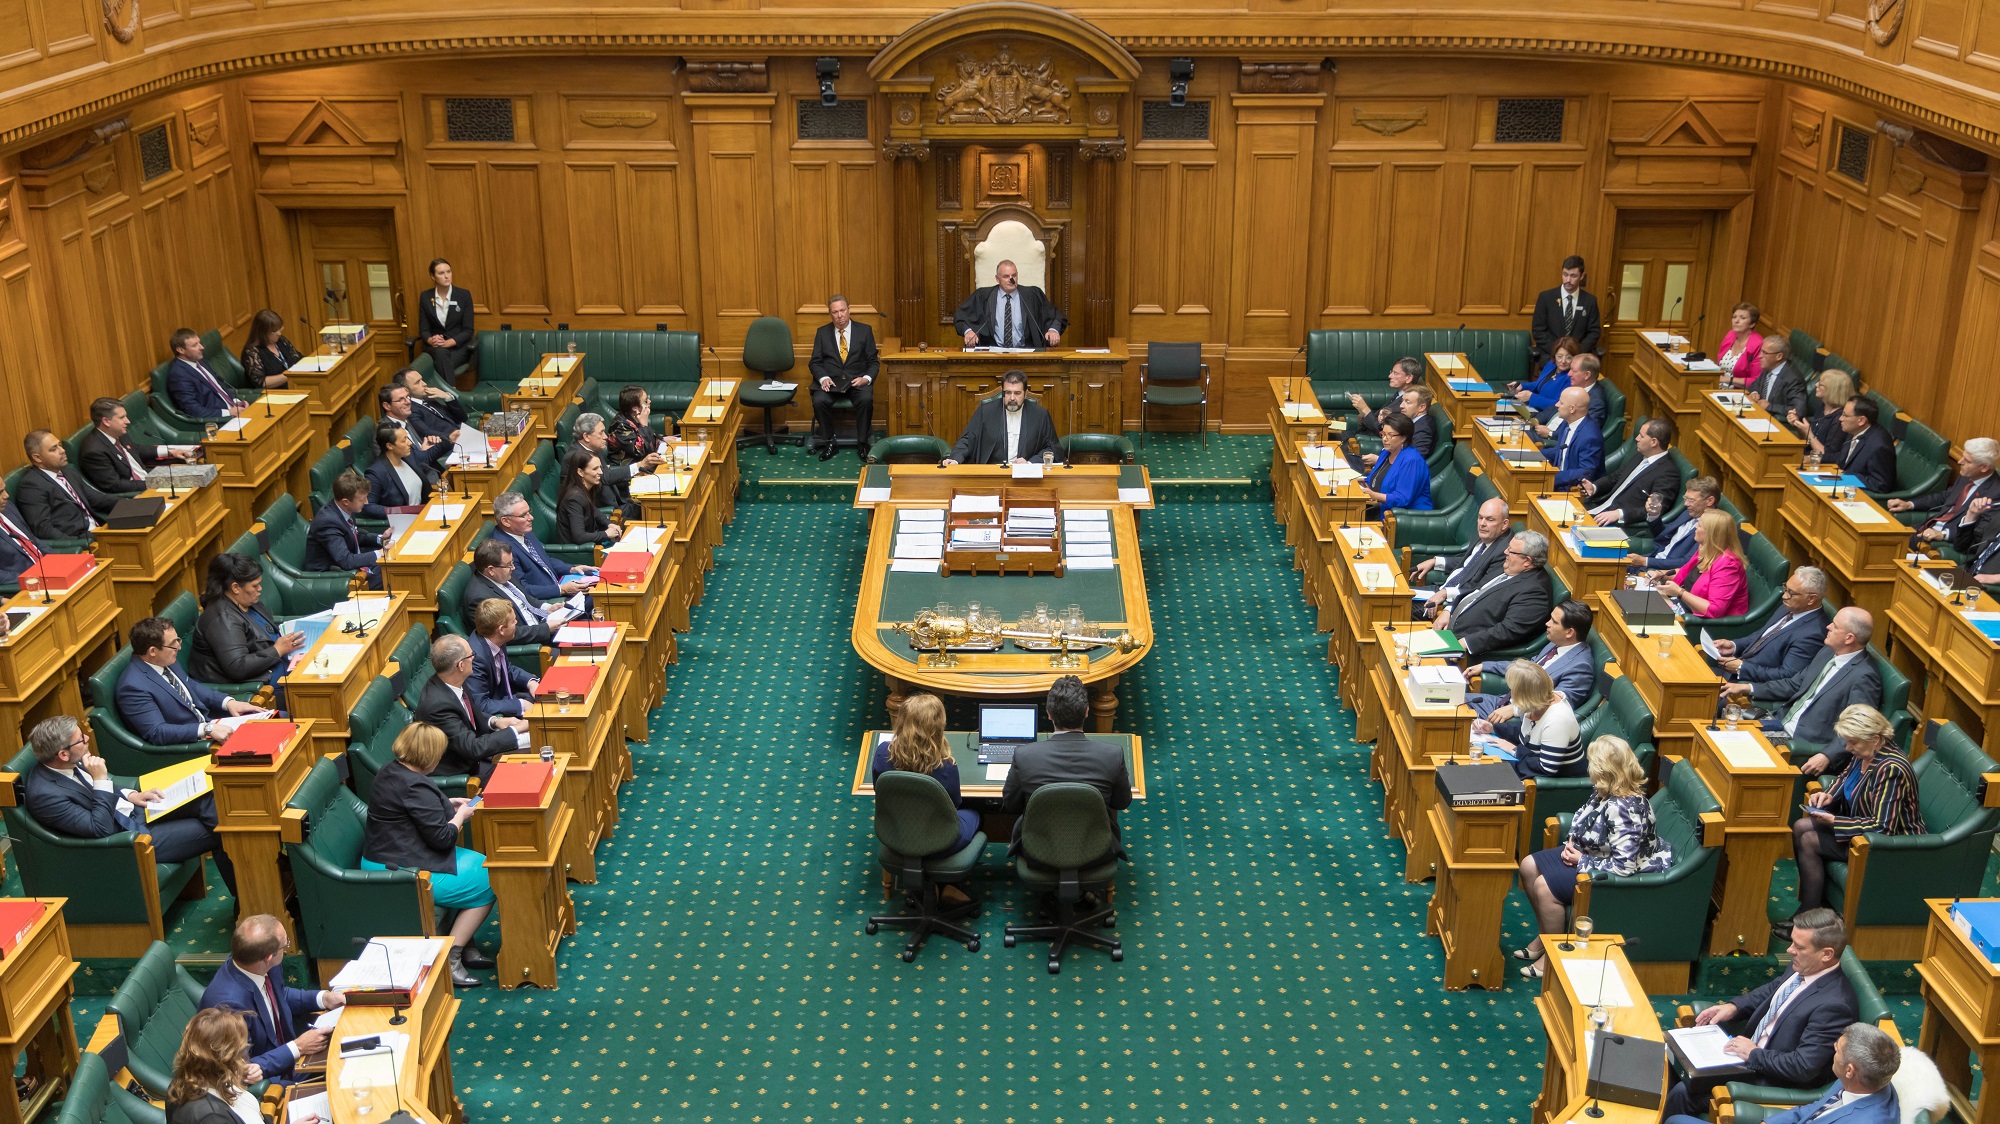 [Aug 26] Regional Seminar on parliaments and the implementation of United Nations Security Council (UNSC) resolution 1540 for Pacific Island Parliaments will be held in the New Zealand Parliament at Wellington, New Zealand